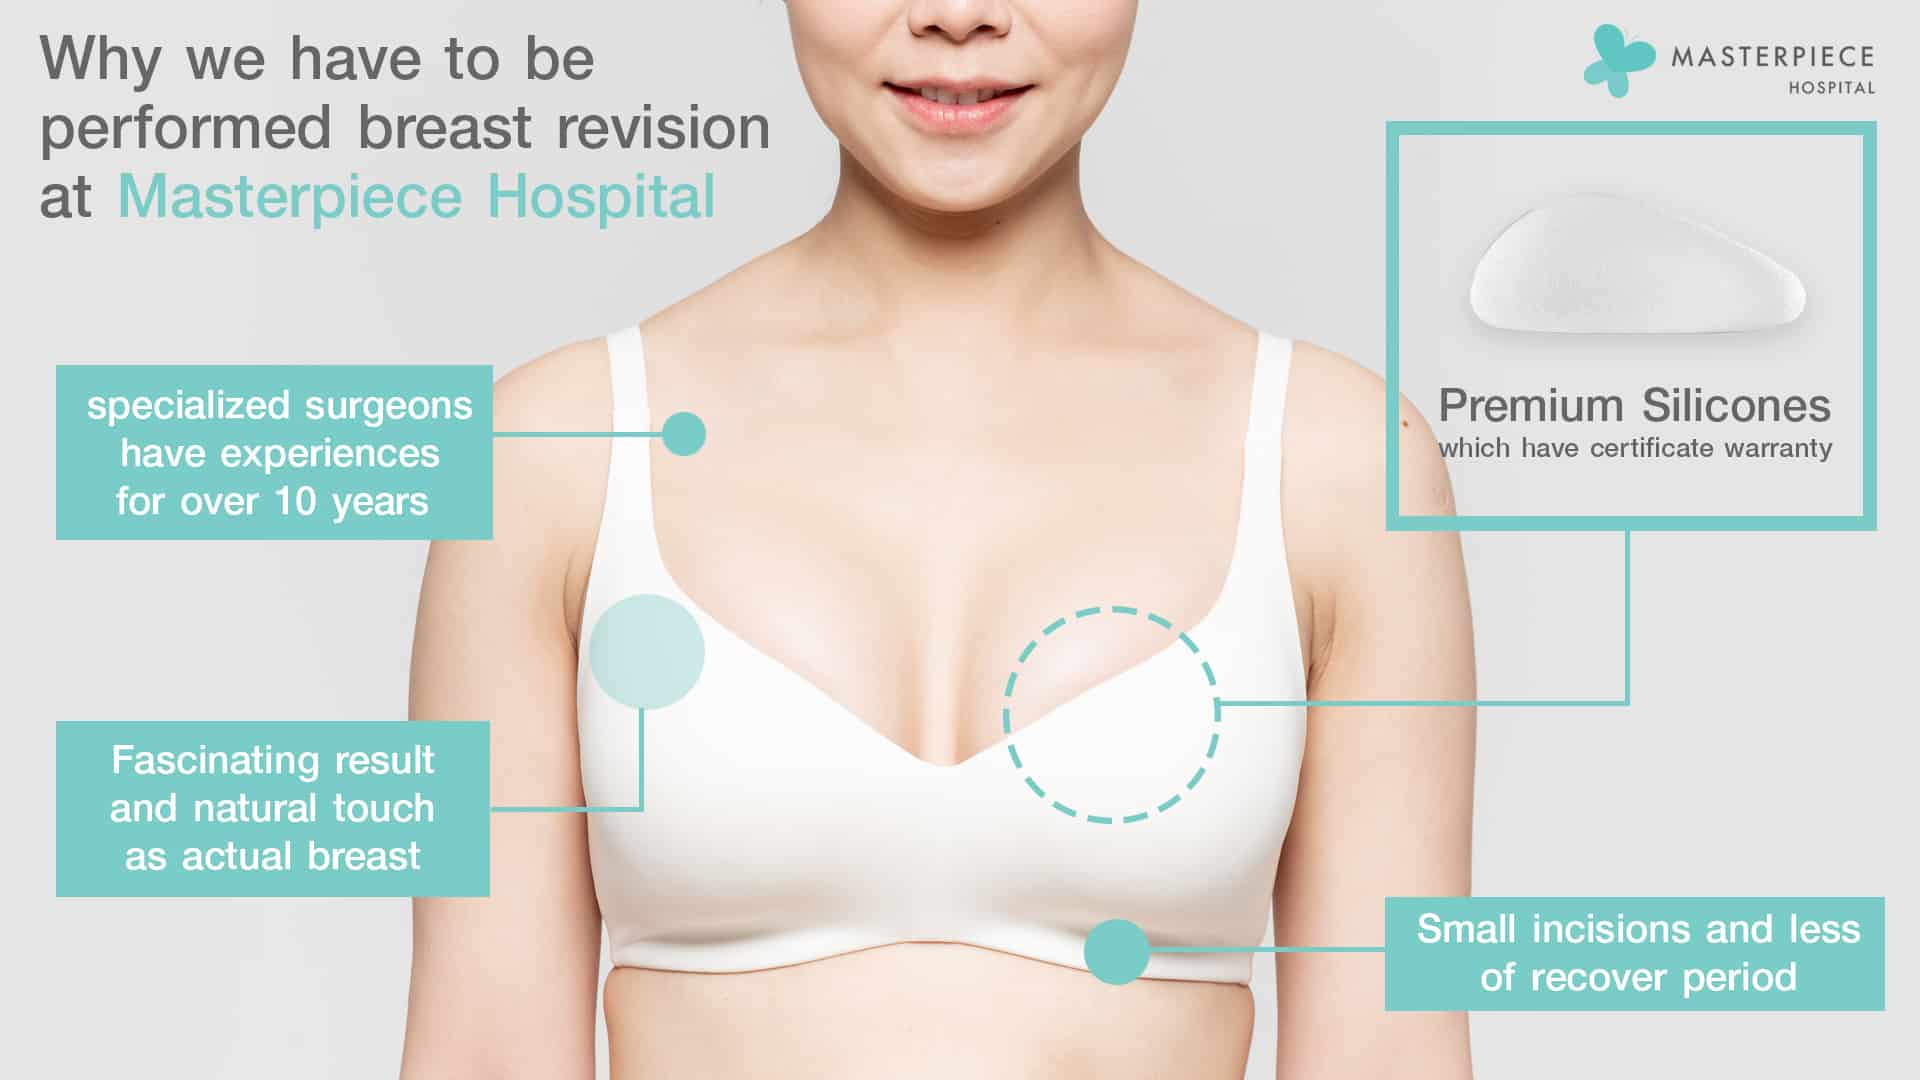 Why we have to be performed breast revision